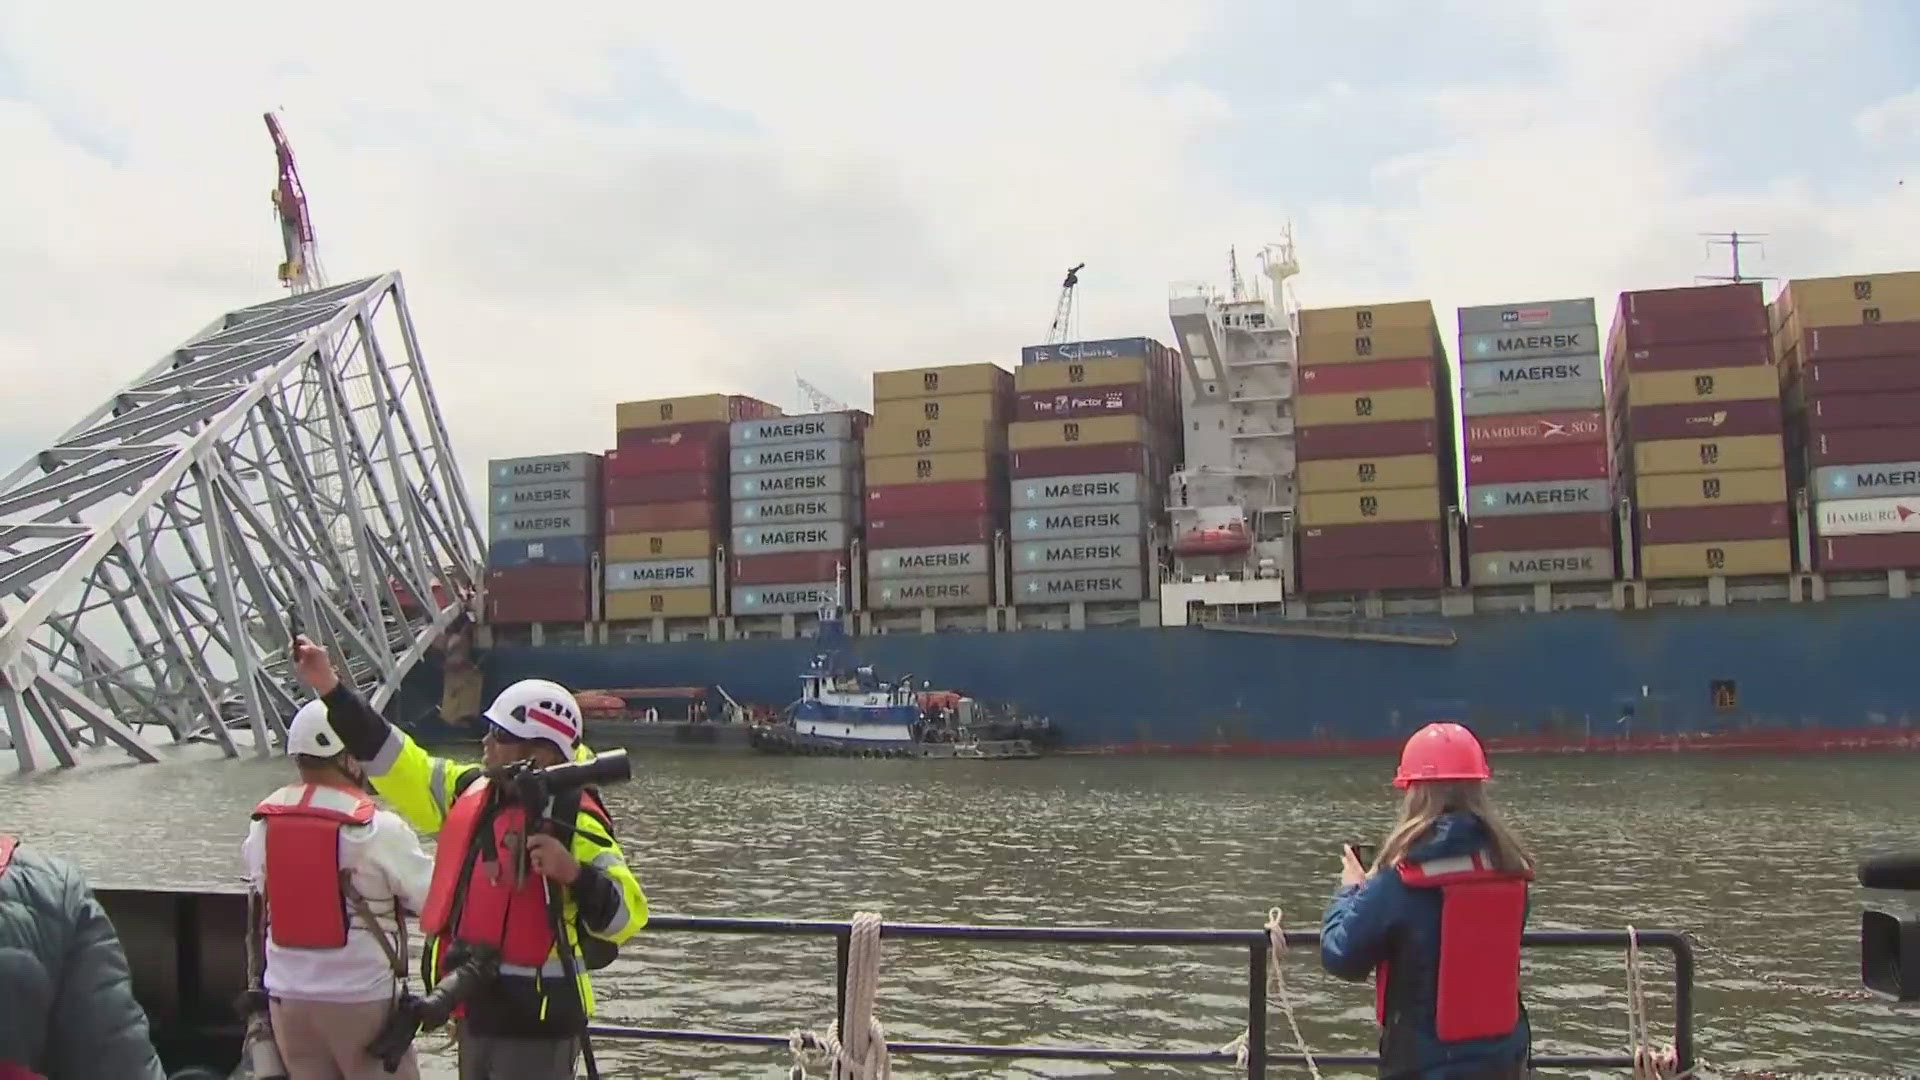 The first cargo ship passed through a newly opened deep-water channel in Baltimore after being stuck in the harbor since the Francis Scott Key Bridge collapsed.